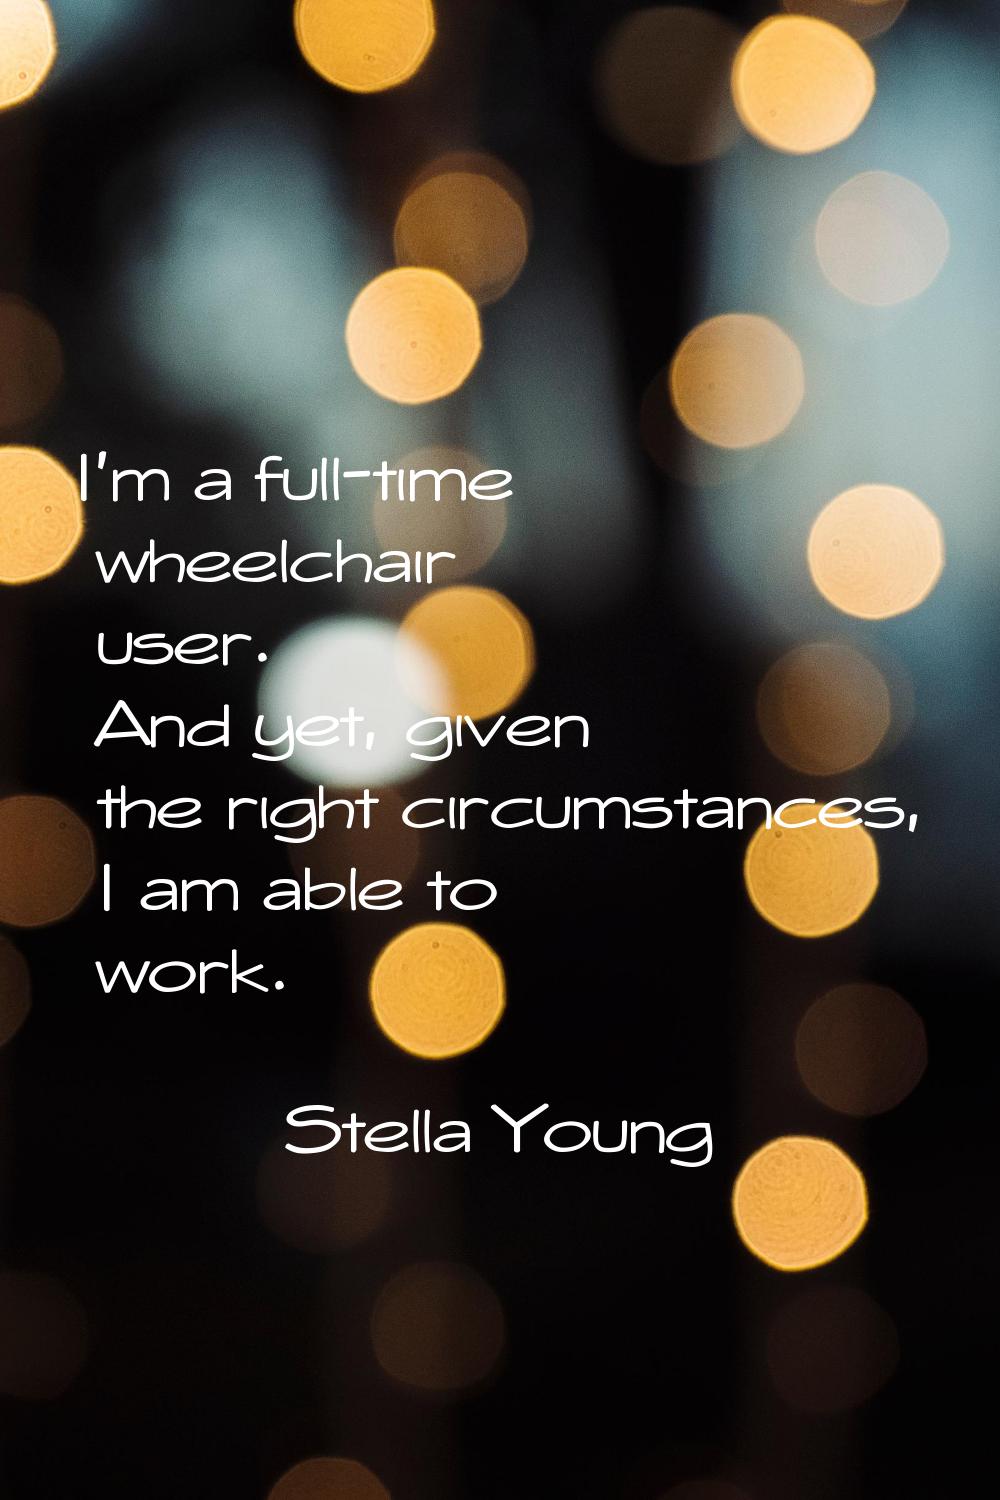 I'm a full-time wheelchair user. And yet, given the right circumstances, I am able to work.